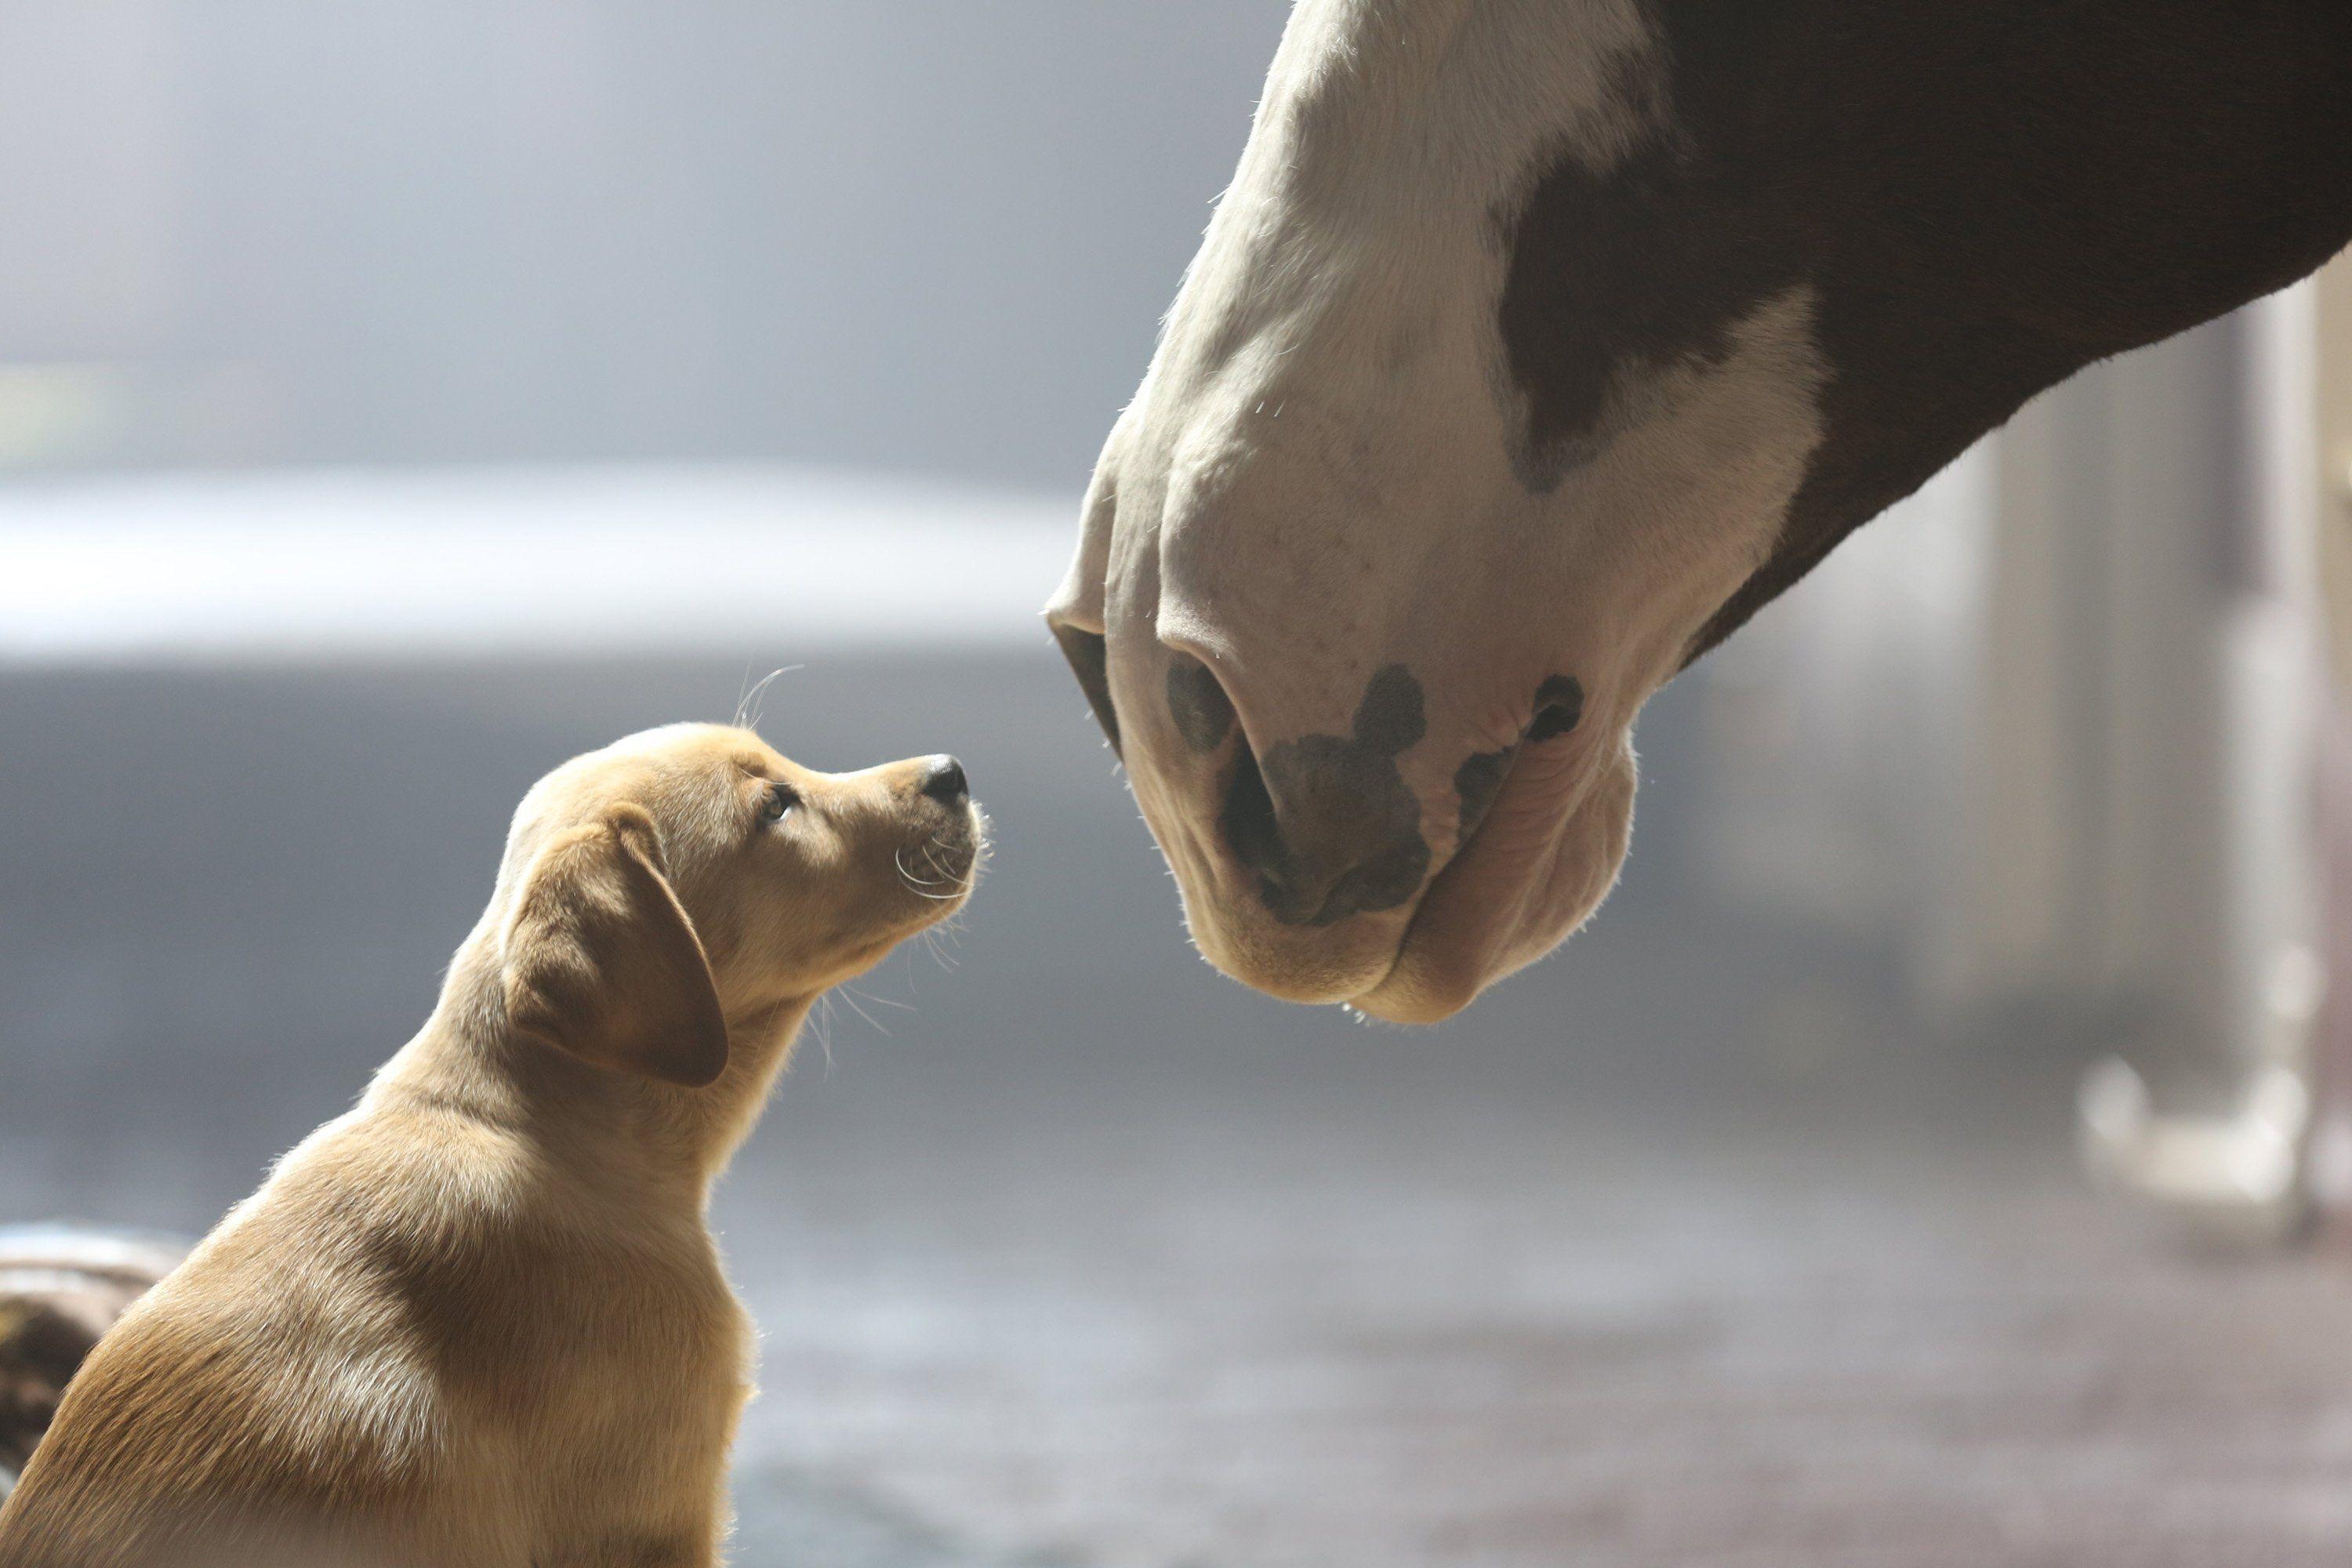 Beer alcohol drink puppy baby horse horses mood cute television